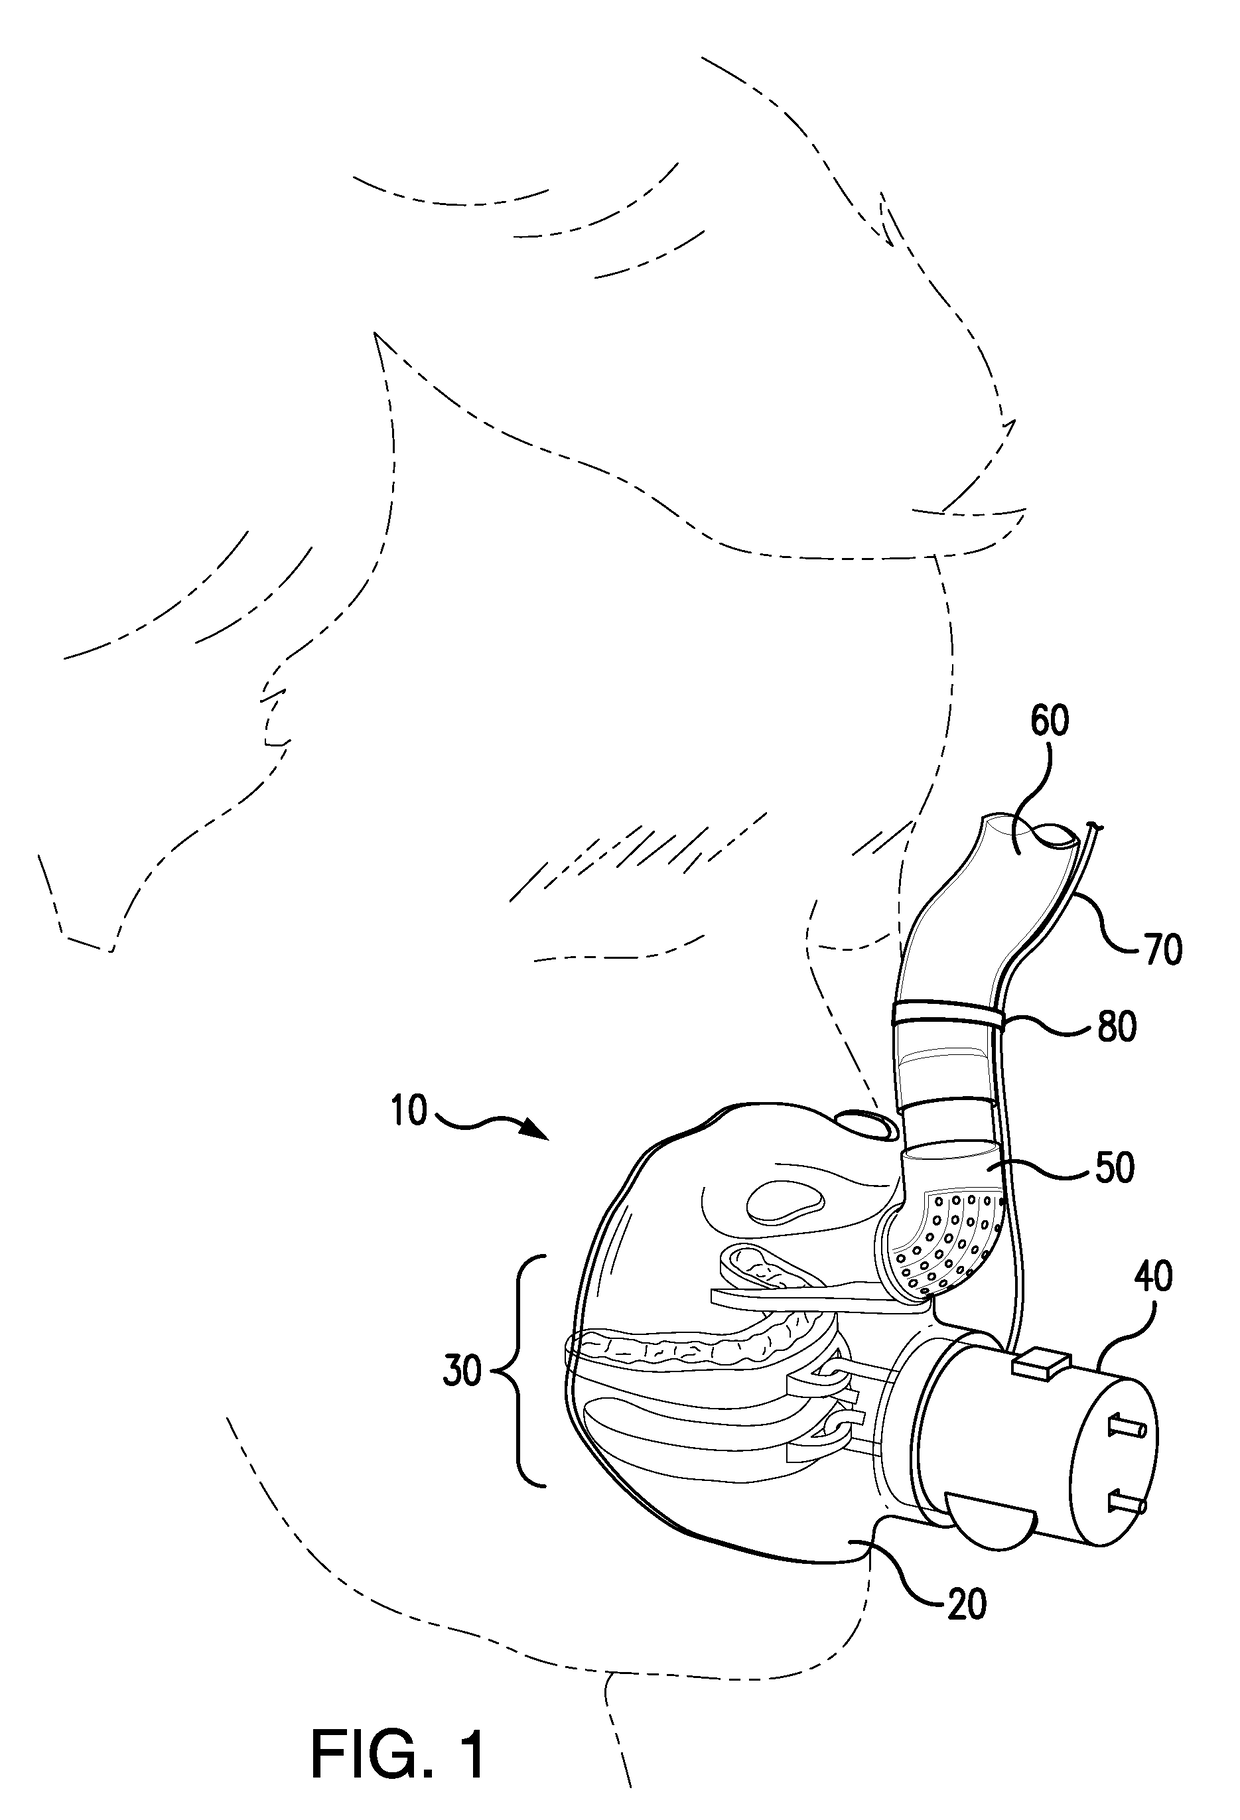 Device and System for Improved Breathing